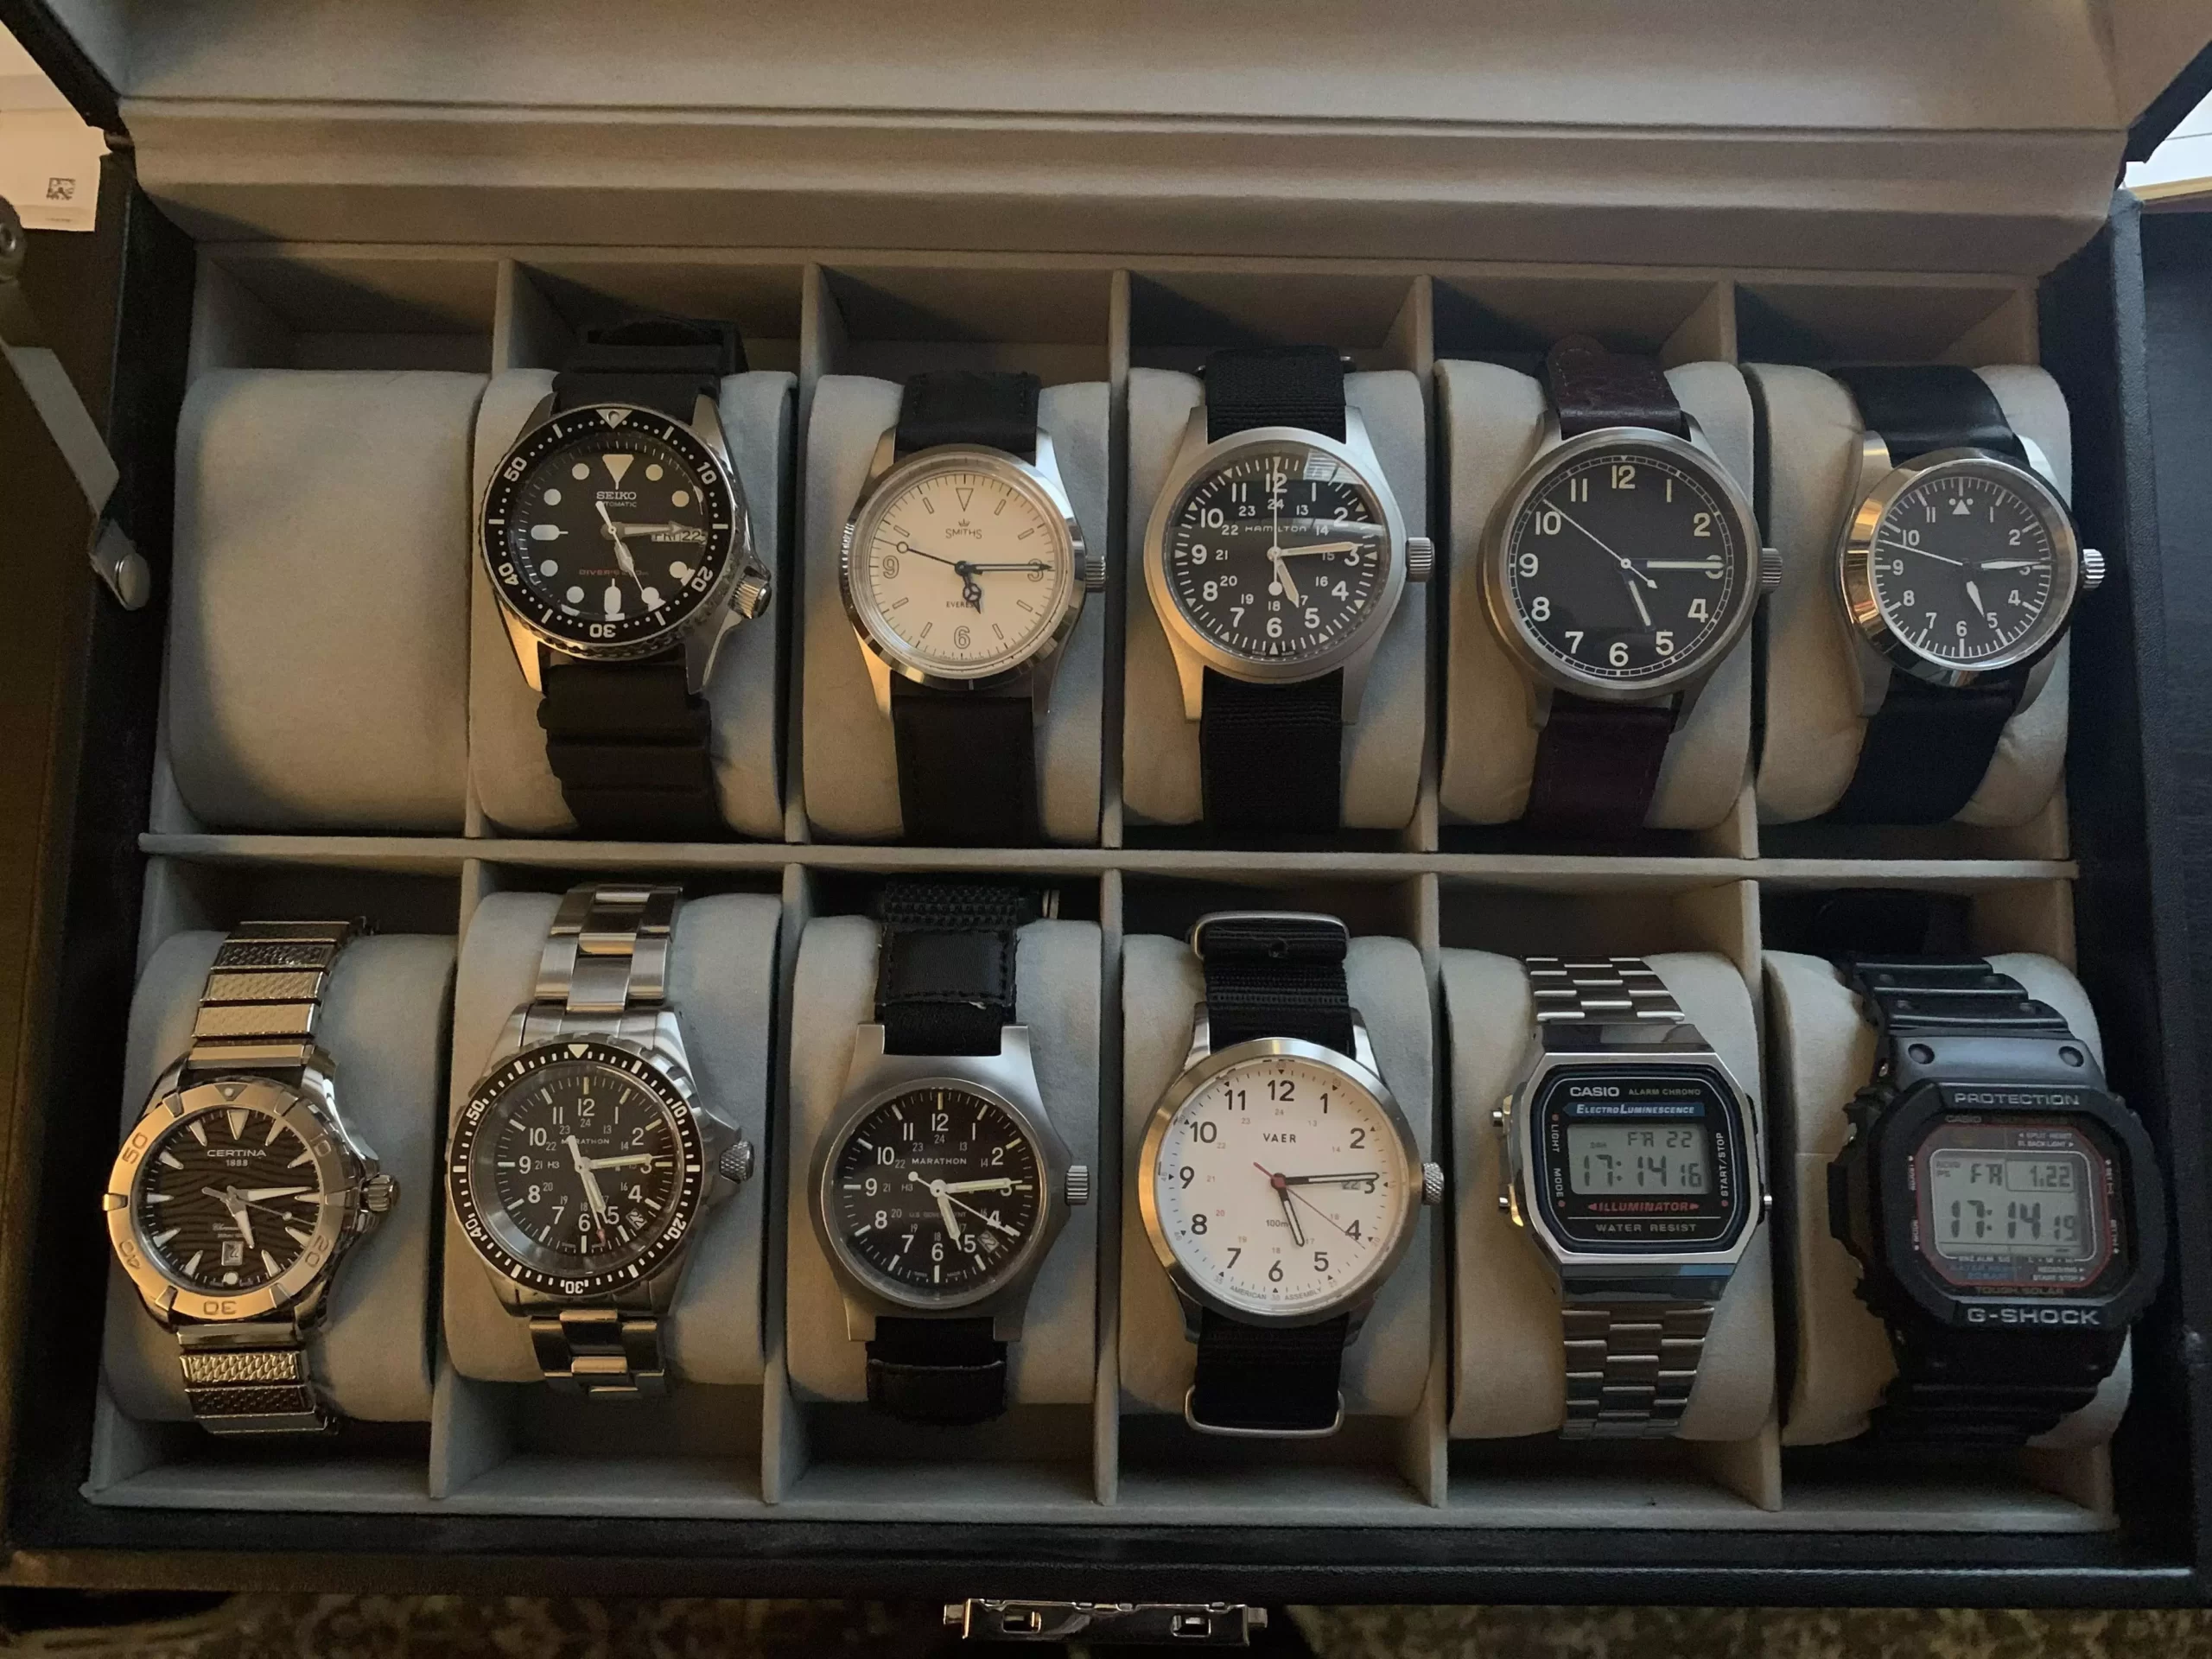 Storing the watches